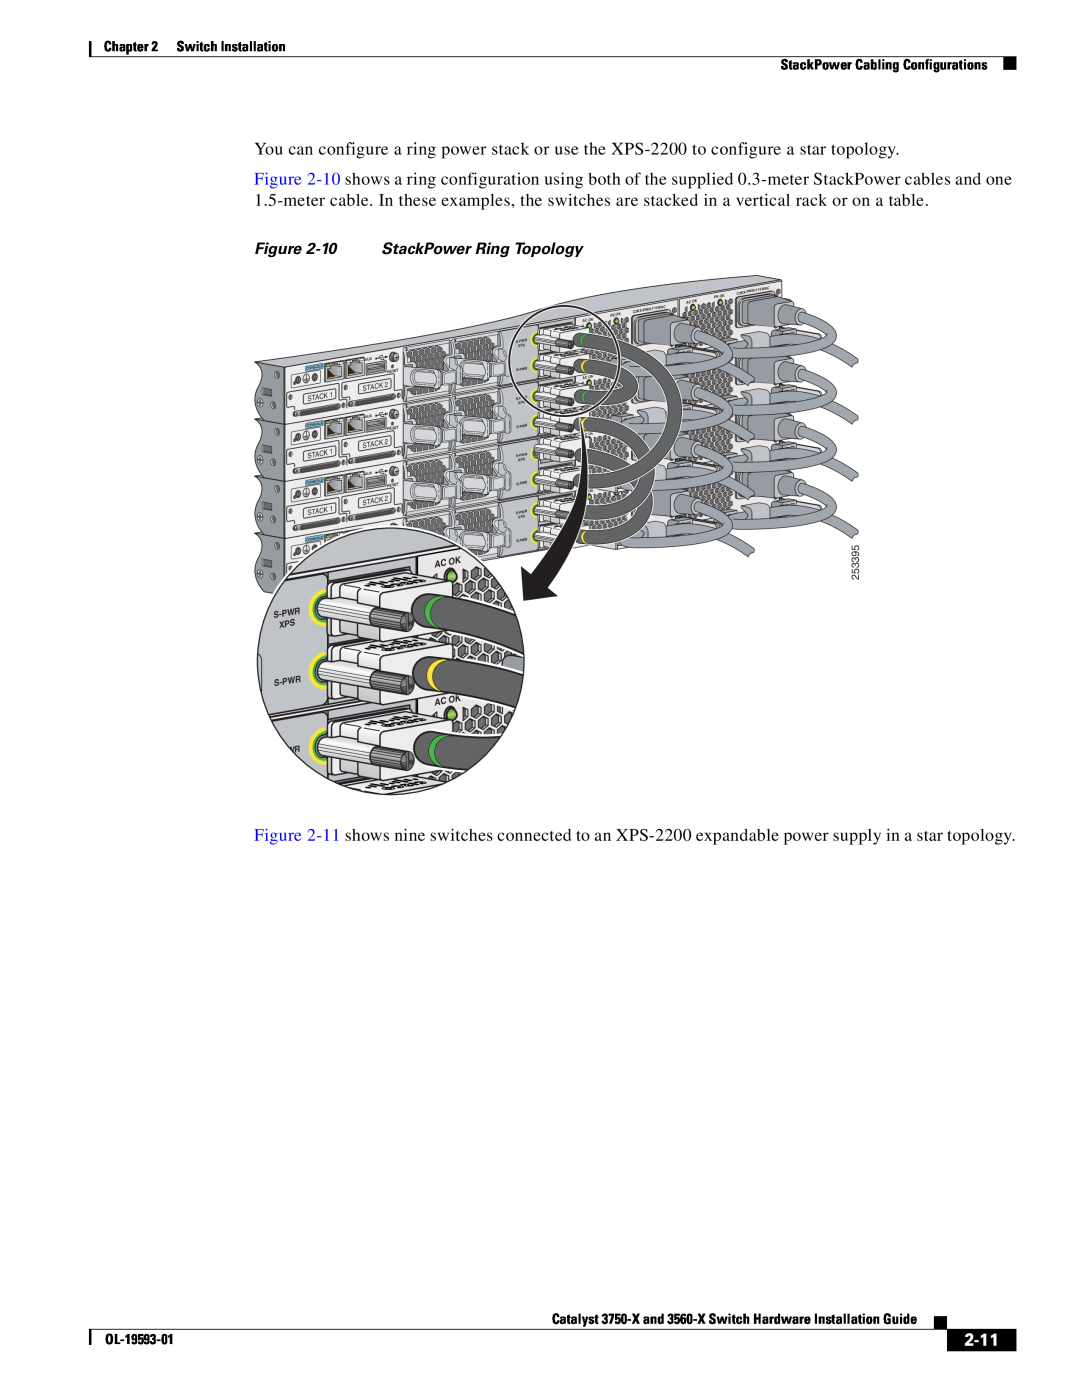 Cisco Systems 3560-X, 3750-X manual 2-11, 10 StackPower Ring Topology 